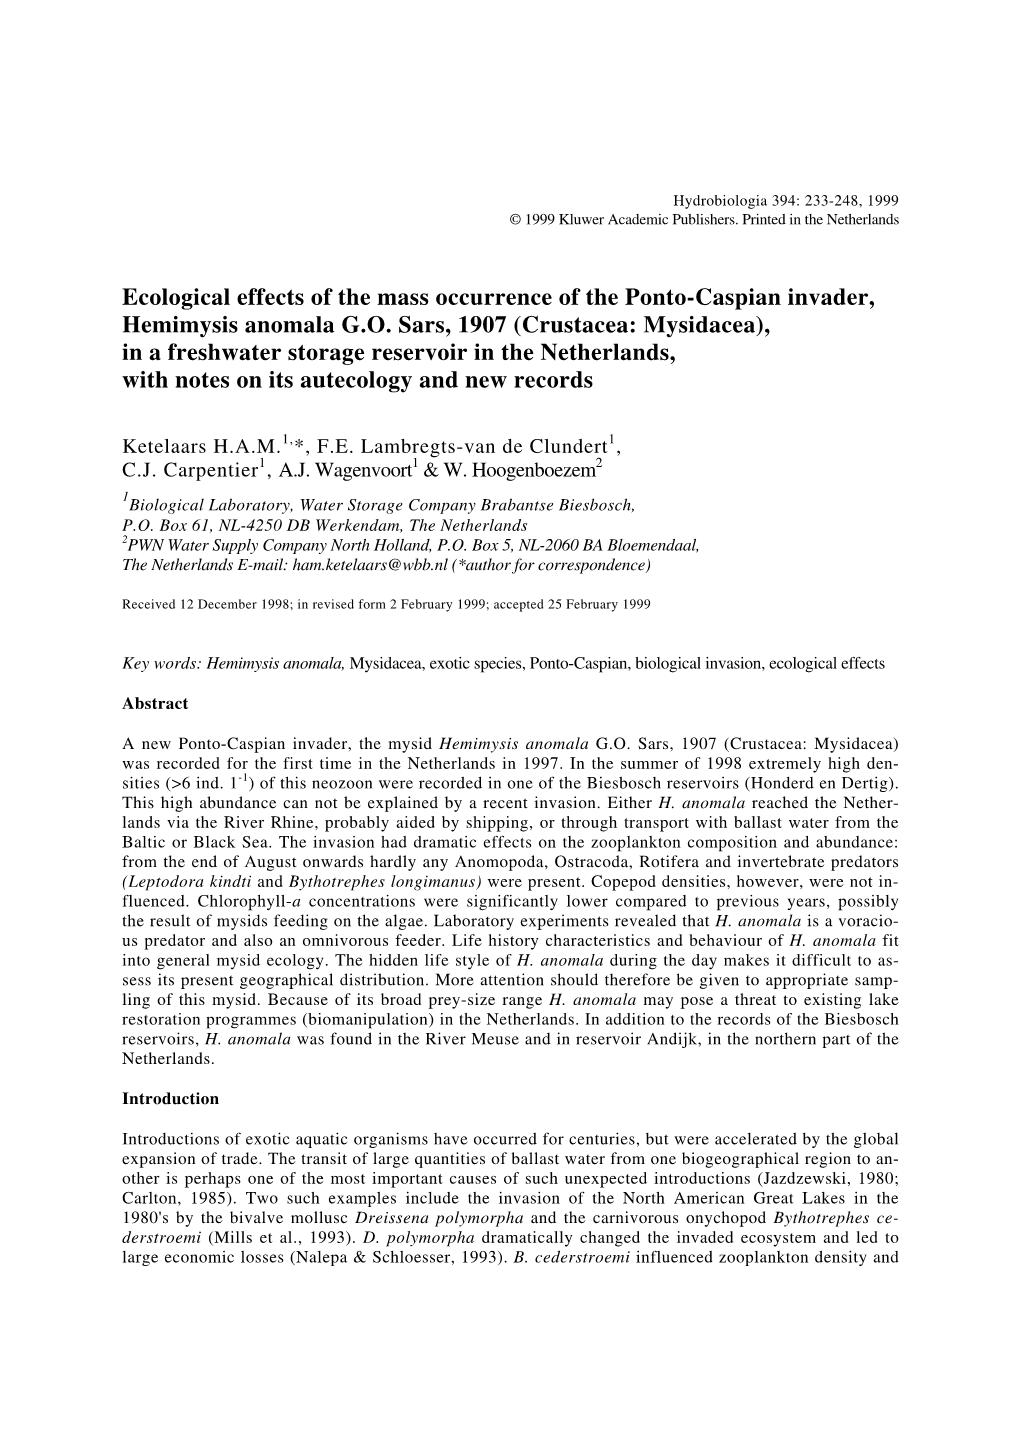 Ecological Effects of the Mass Occurrence of the Ponto-Caspian Invader, Hemimysis Anomala G.O